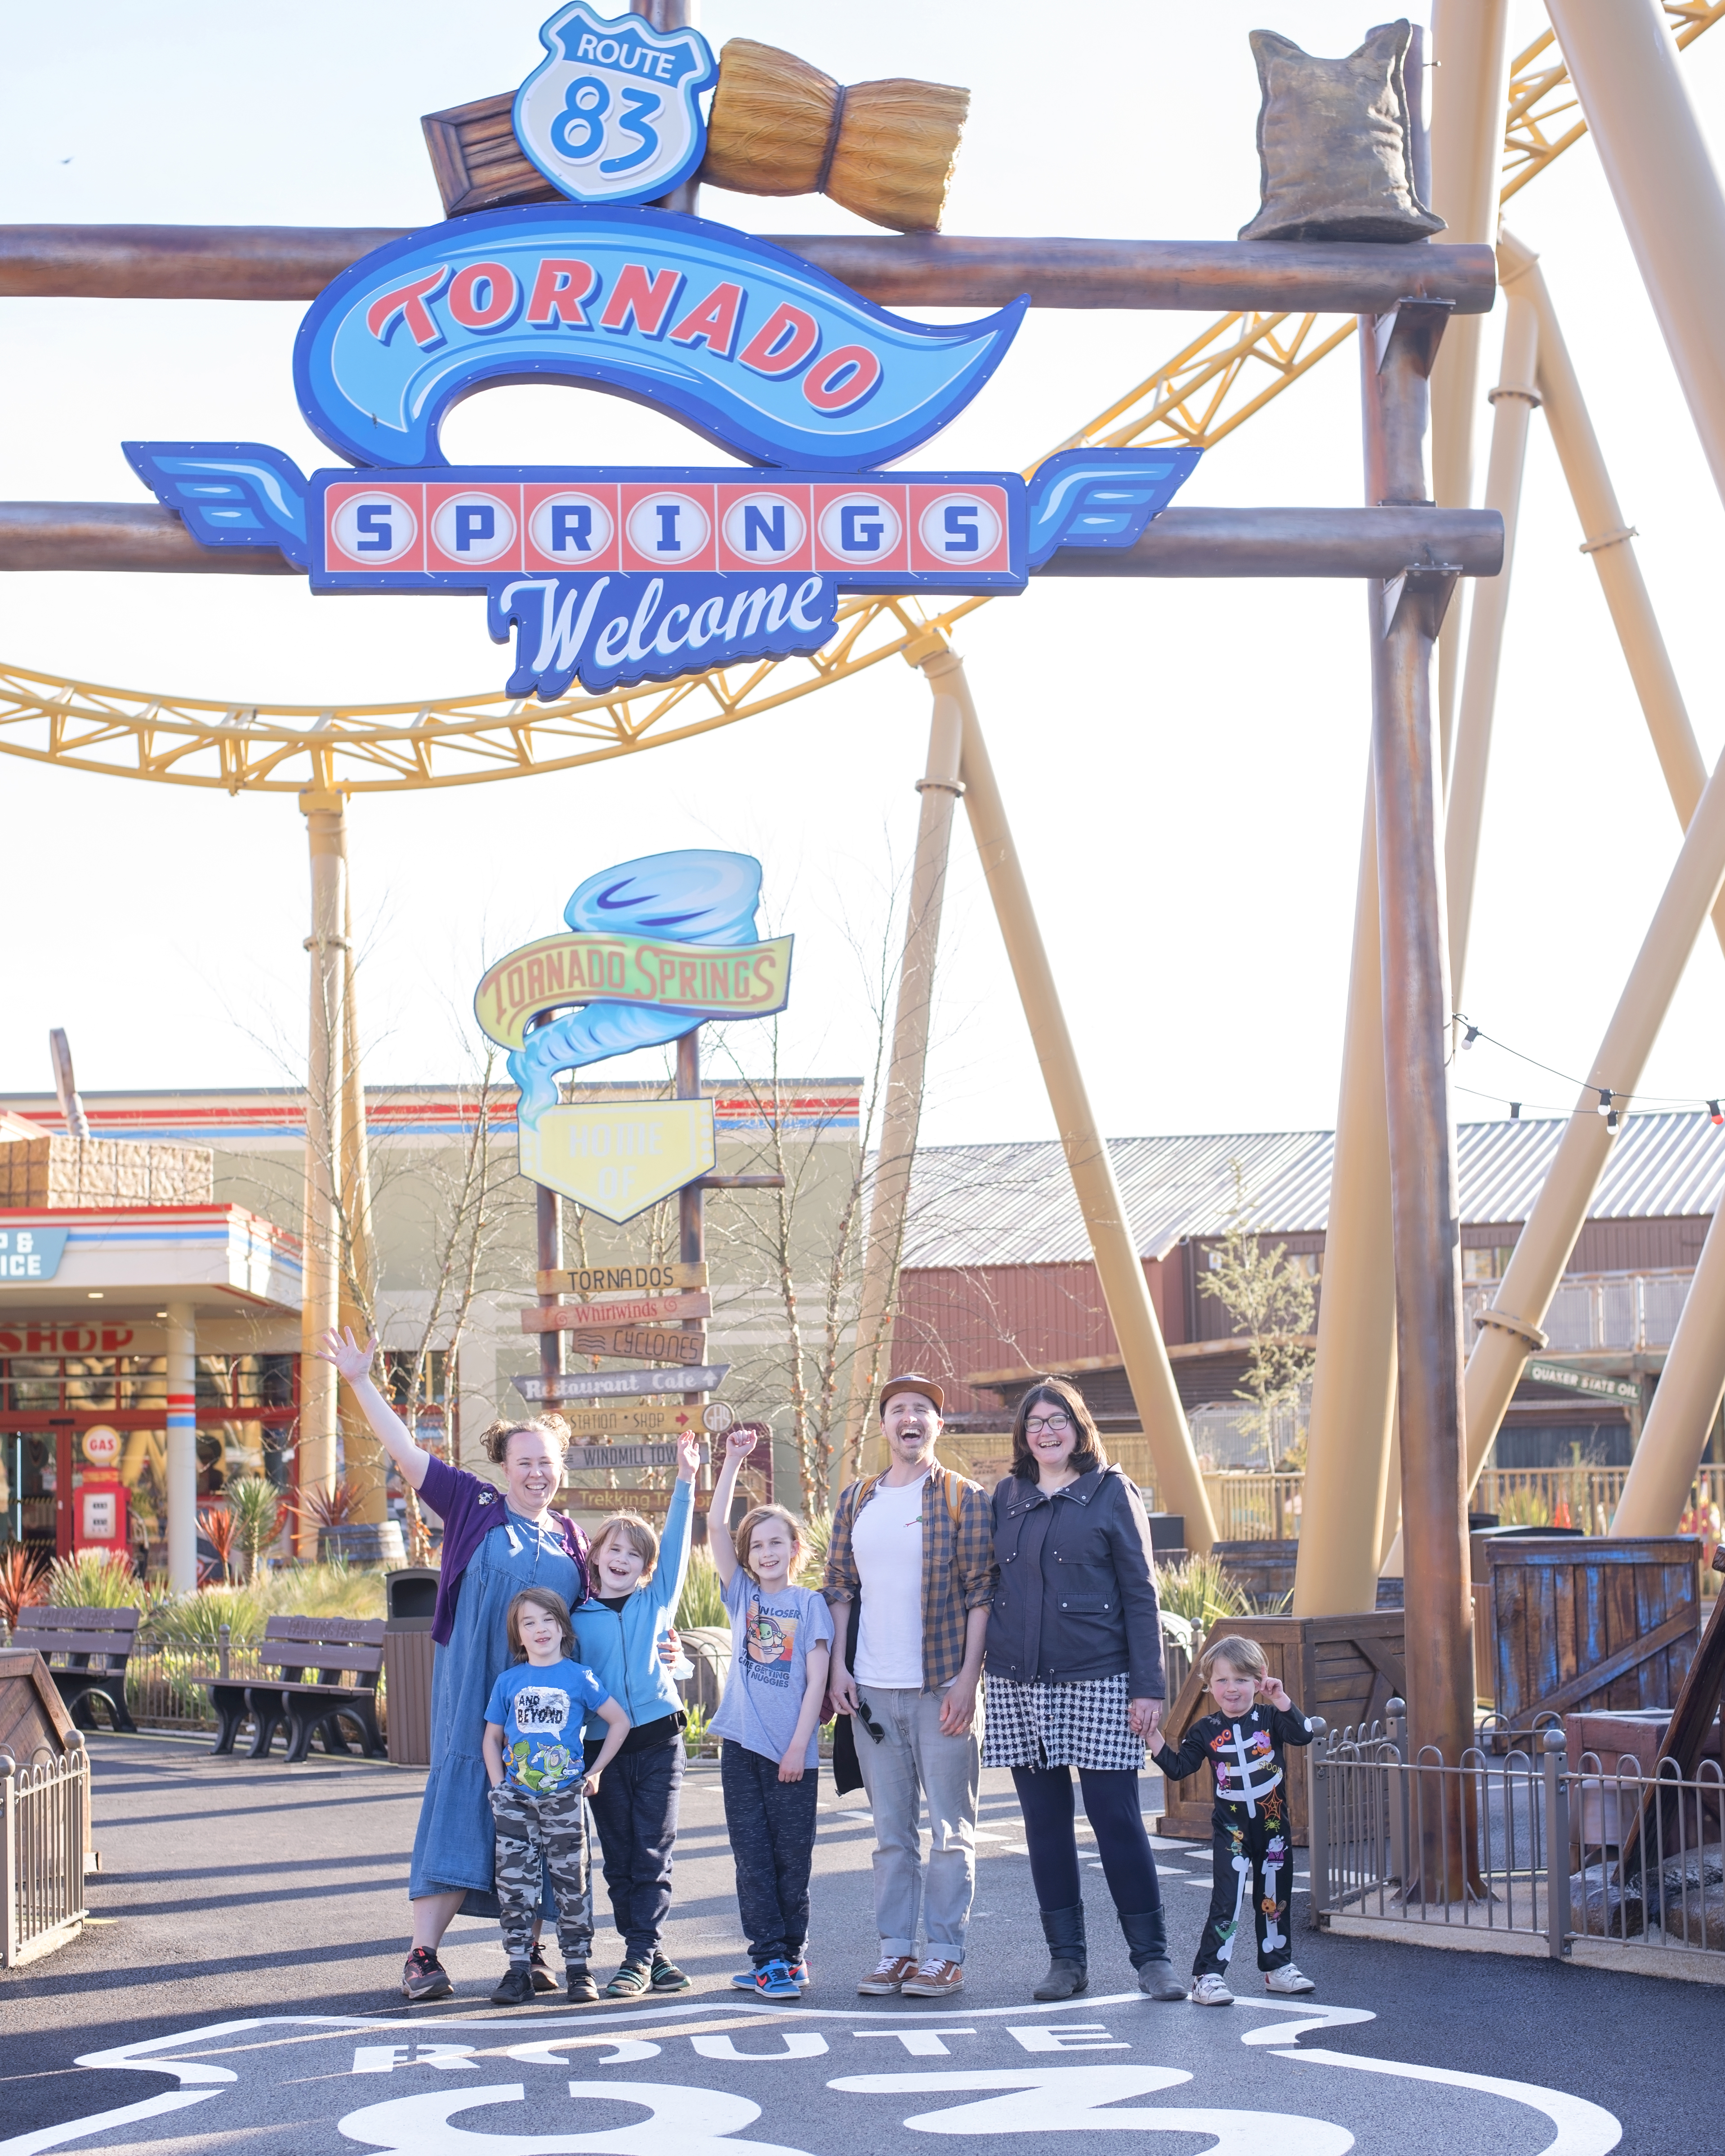 Image shows a family of seven stood underneath the Paultons park Tornado Springs rollercoaster and sign in ower, hampshire. The rollercoaster is the yellow storm chaser new for 2021 and on the floor is a large painted white route 83 logo.